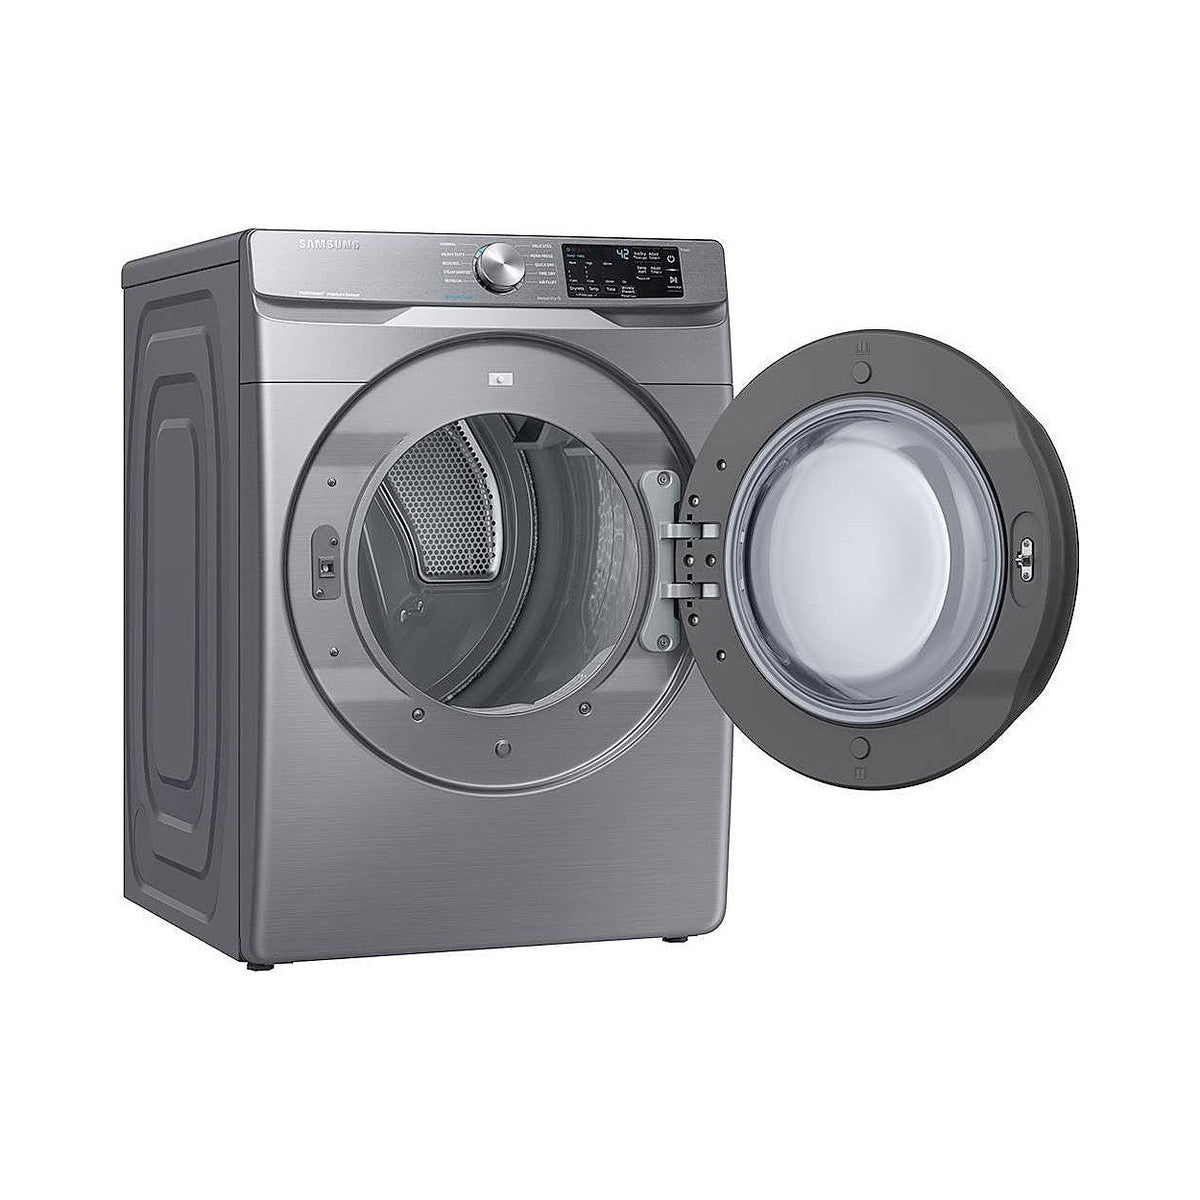 SAMSUNG DVG45R6100P/A3 7.5 Cu. Ft. 10-Cycle Gas Dryer with Steam - Platinum